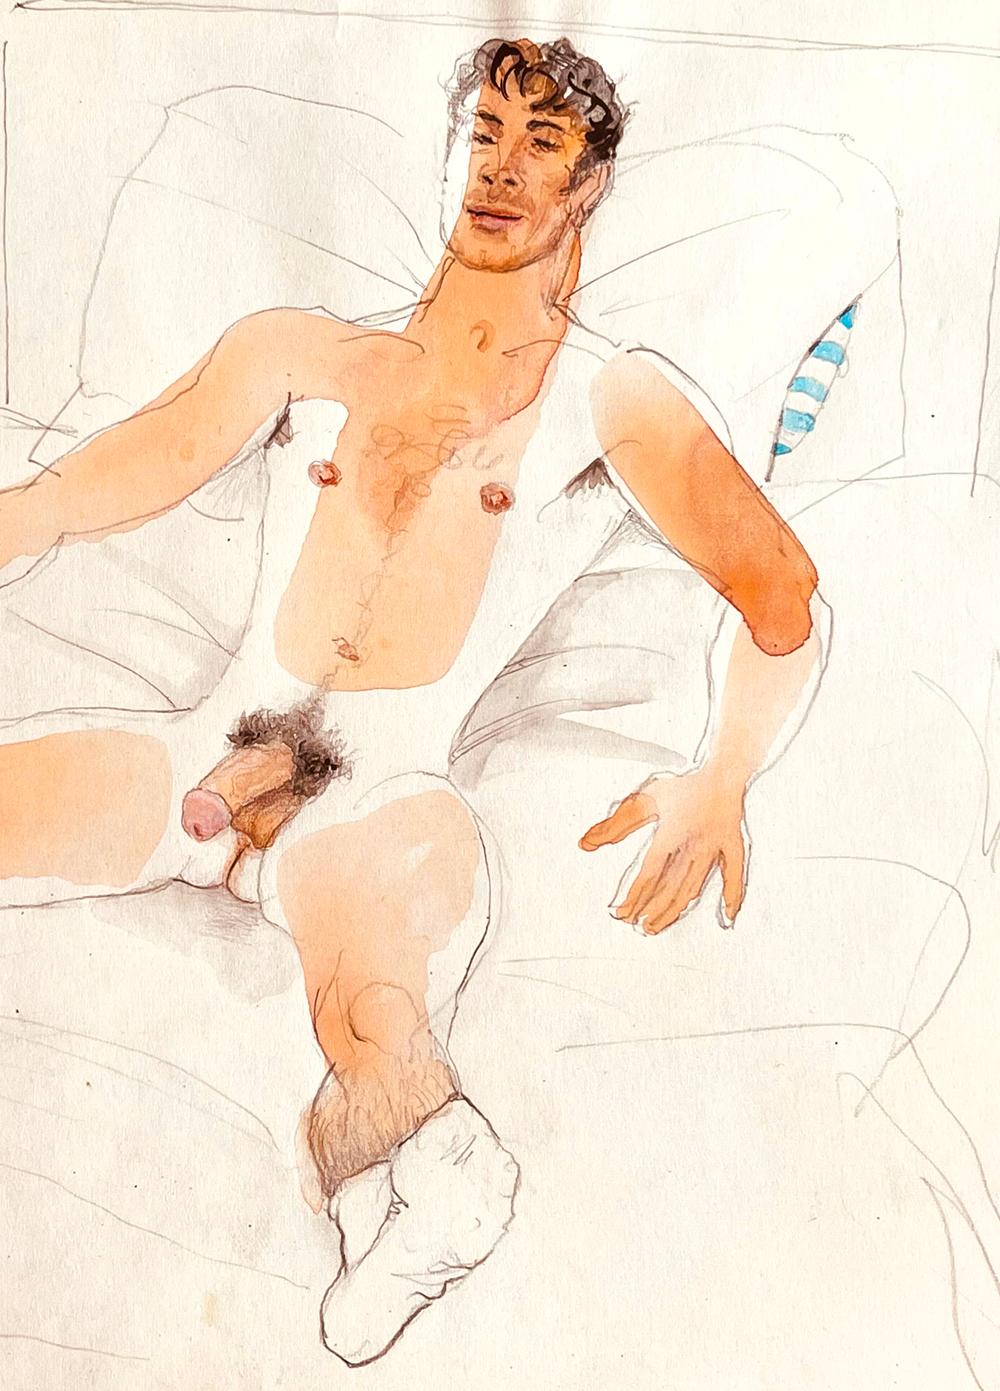 Provocative and unapologetic, this watercolor depiction of a fully nude sailor sprawled across his bed, his uniform and cap neatly laid on a chair to one side, was painted by Emlen Etting, a Philadelphia painter who hobnobbed with society but also